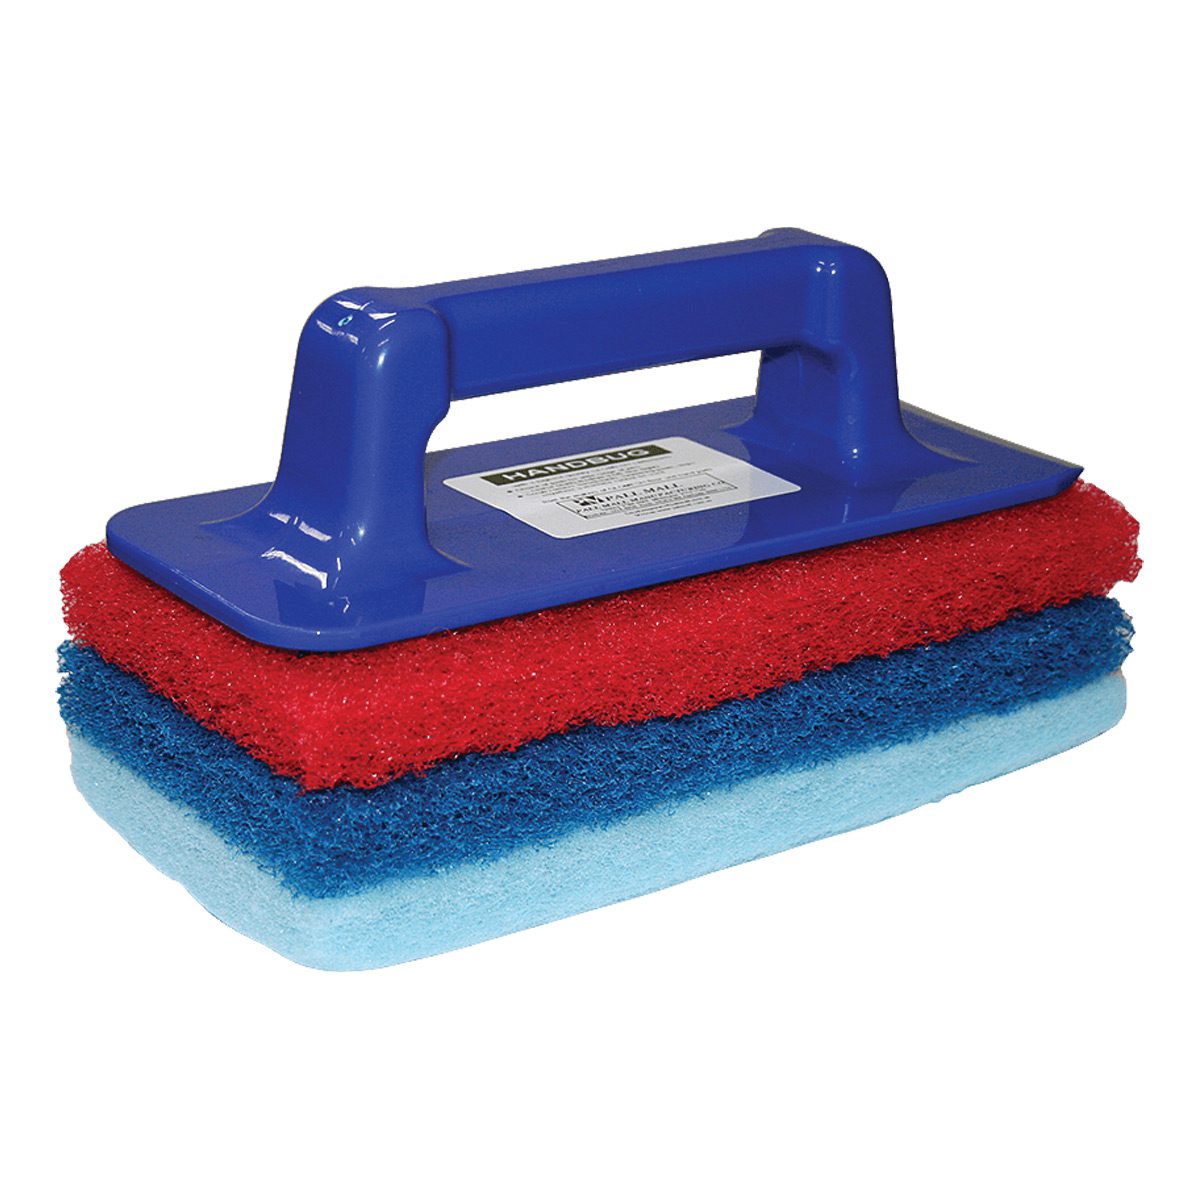 cleaning-equipment-cloths-scourers-wipes-glomesh-hand-bug-with-3-pads-vjs-distributors-GBHNB003